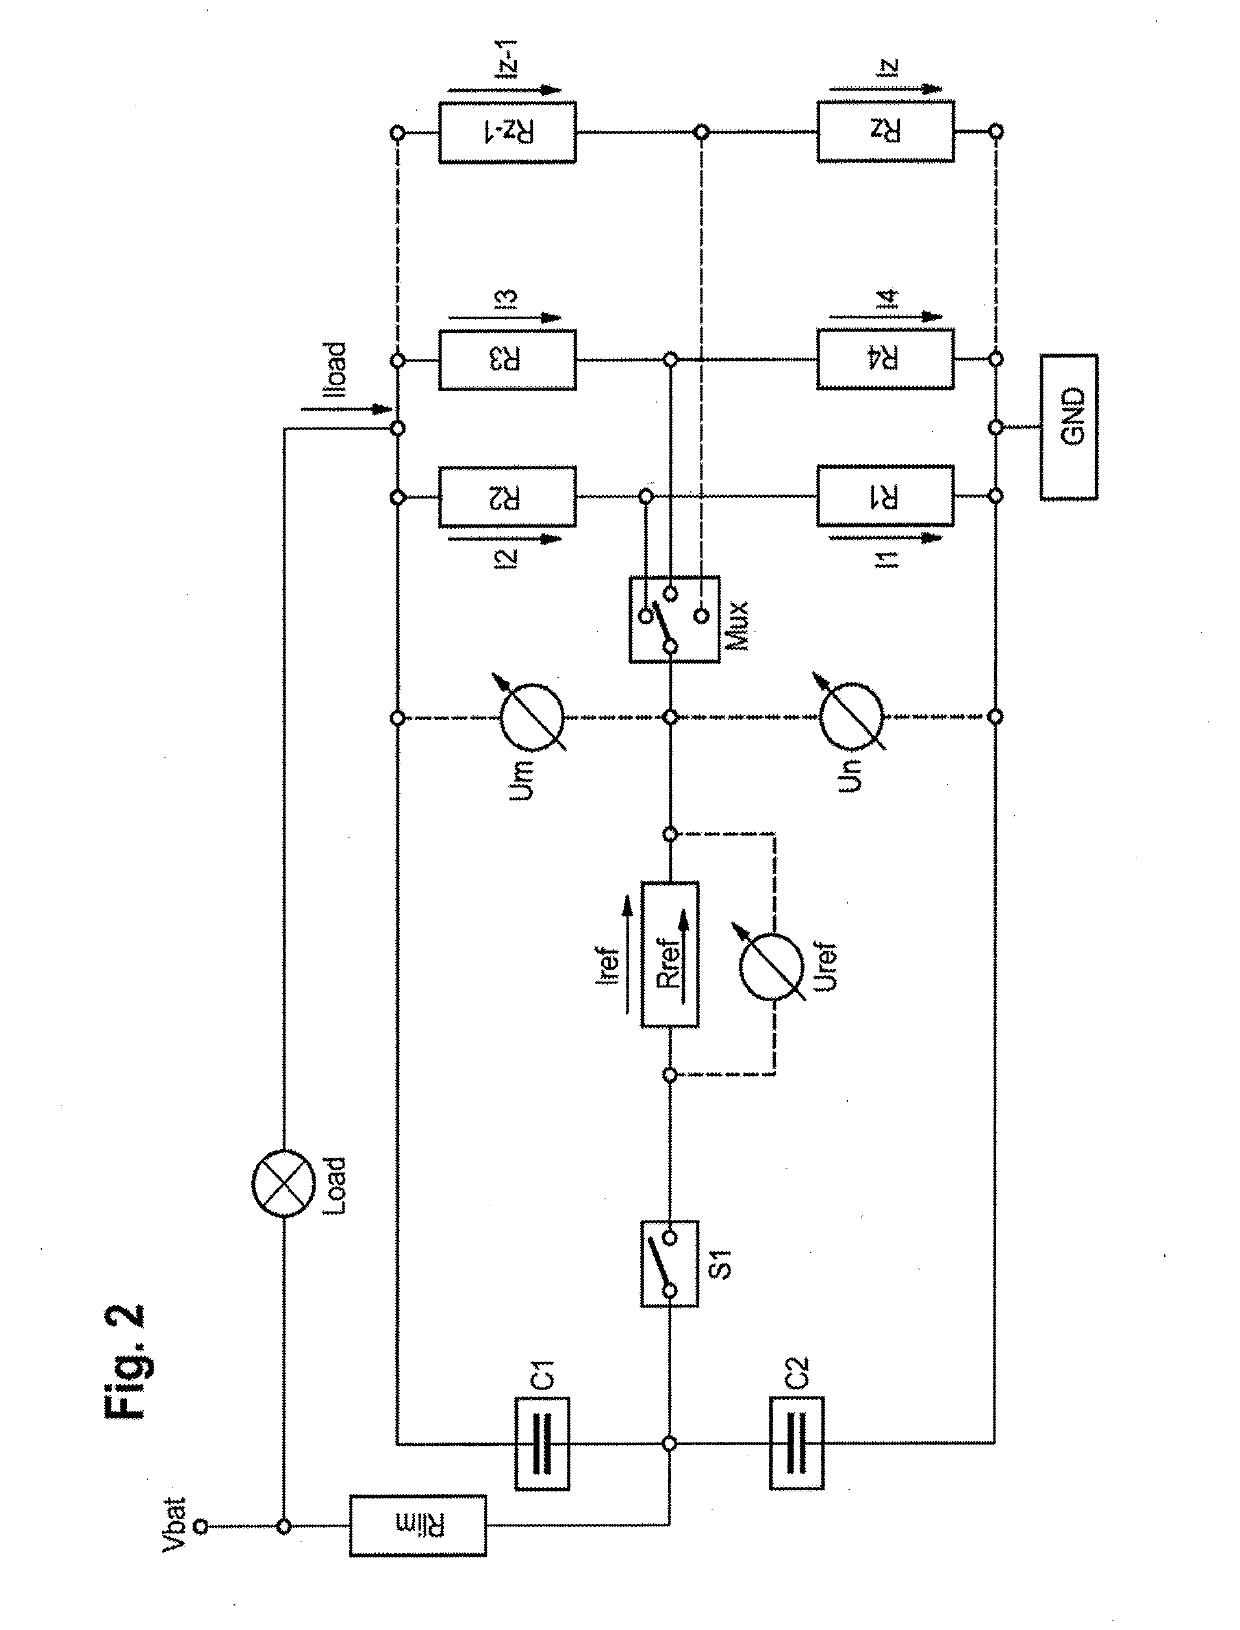 Method for determining a load current and battery sensor